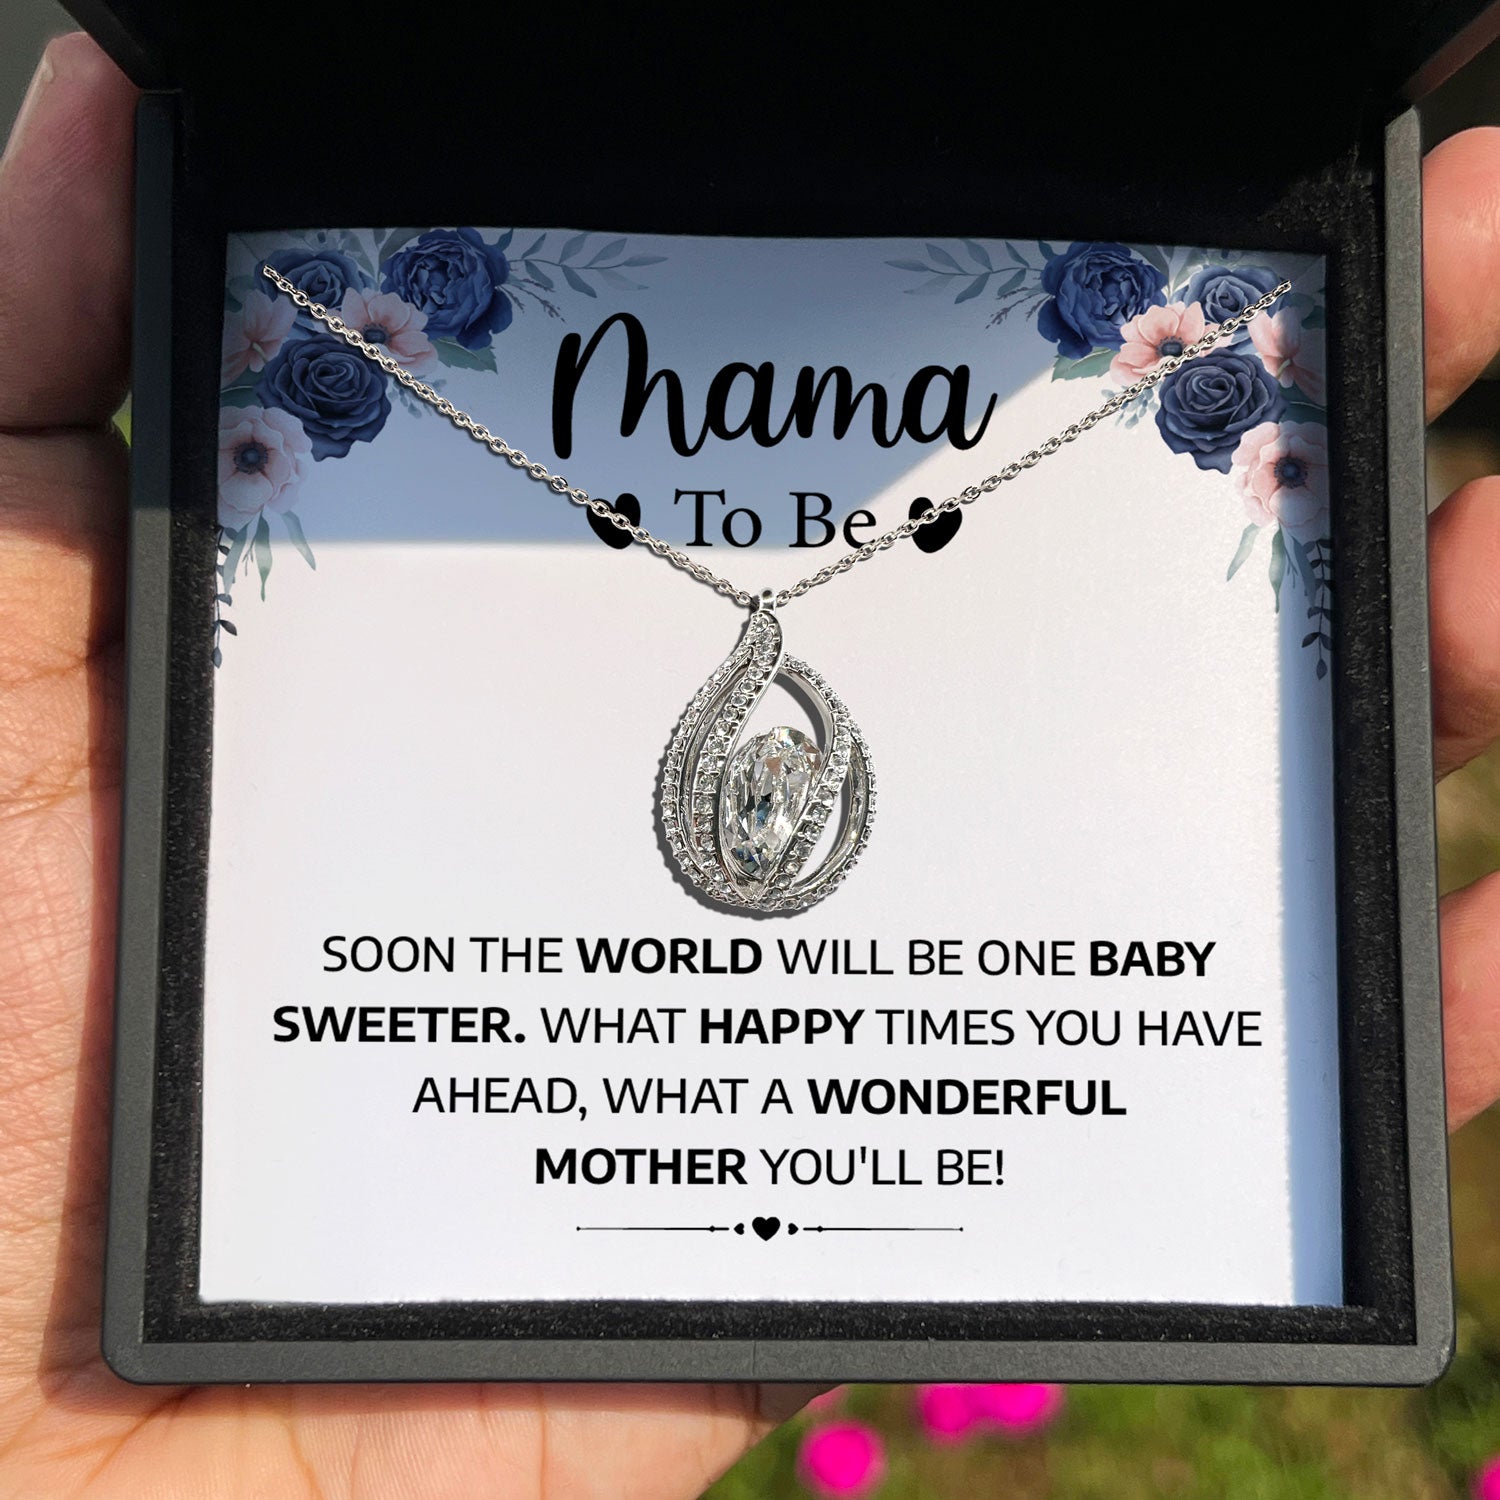 To Mama To Be - Soon The World Will Be One Baby Sweeter - Orbital Birdcage Necklace